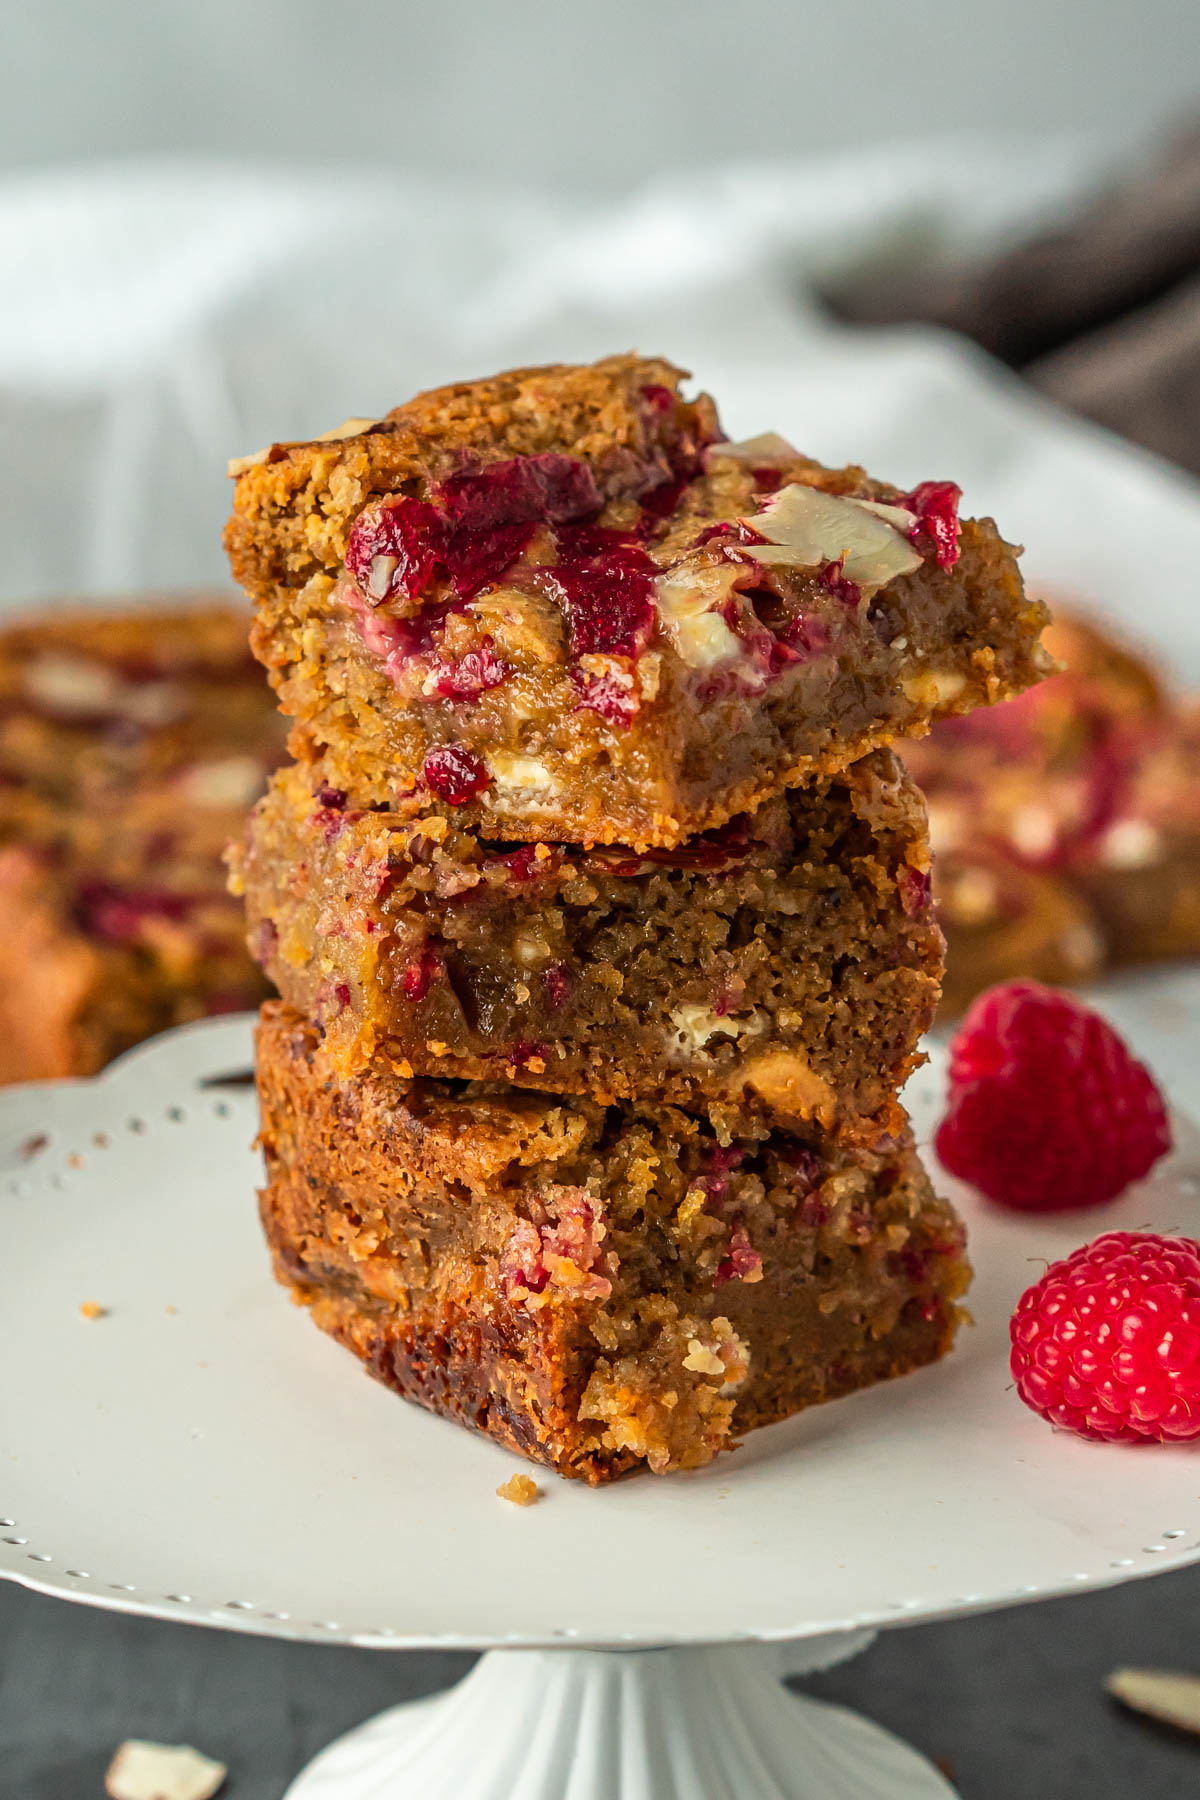 A stack of three square, golden-brown dessert bars drizzled with raspberry jam and studded with white chocolate and slivered almonds.